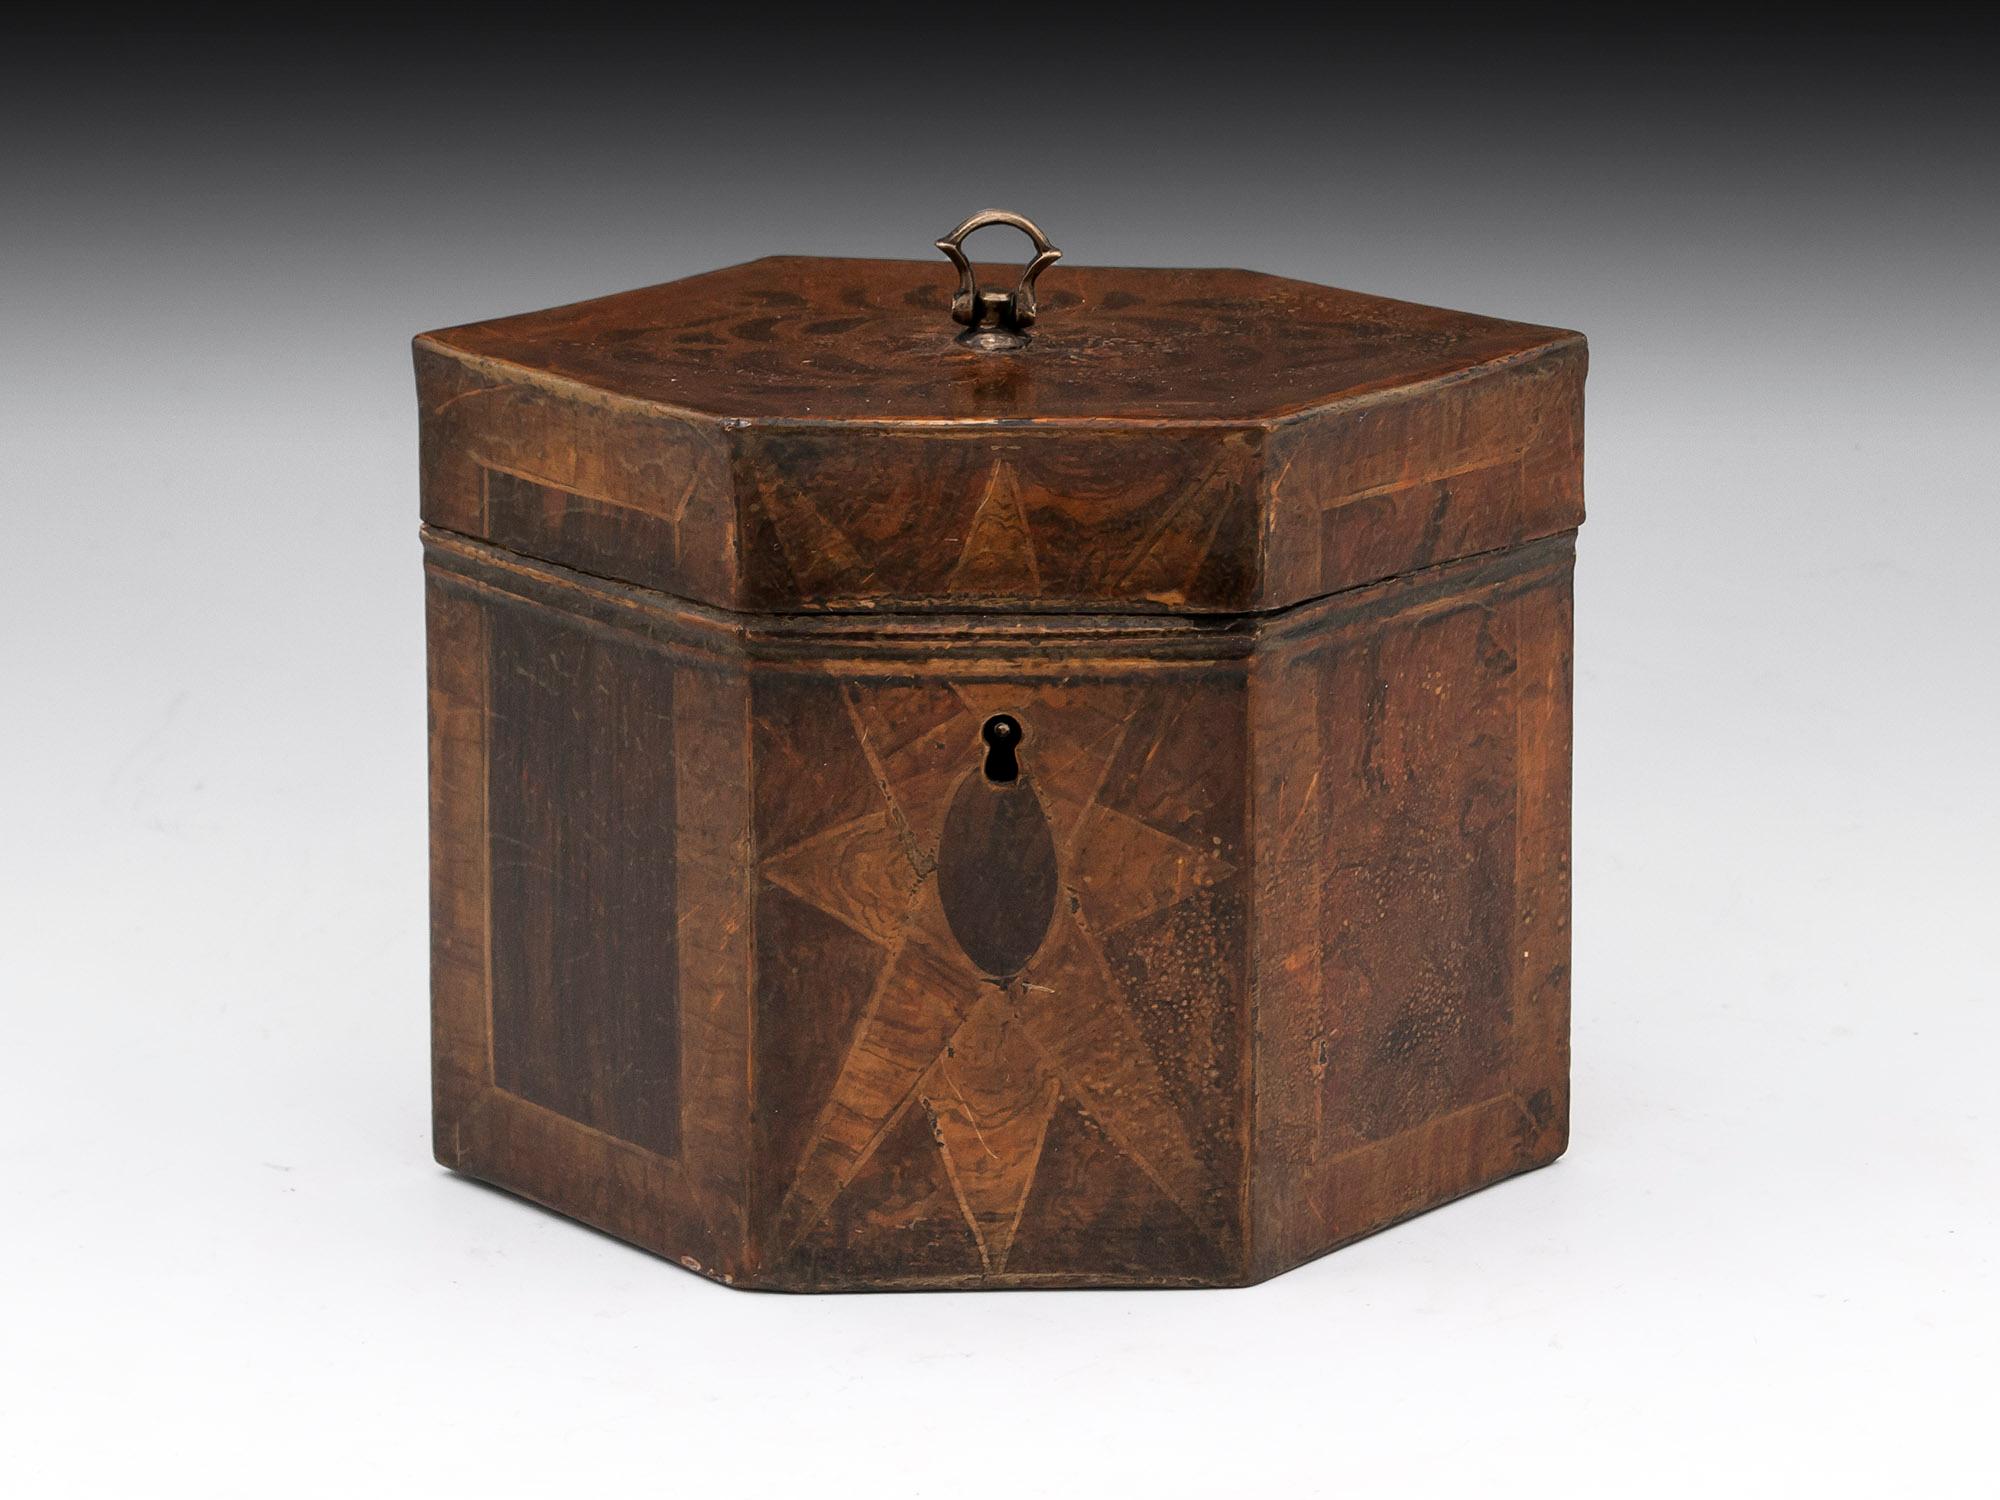 Antique Tinware tea caddy with realistic painted burr veneers, inlays with crossbanding and star motifs. The top has a brass axe handle to help when opening the tea caddy. 

This fabulous twin Tinware tea caddy has comes complete with fully